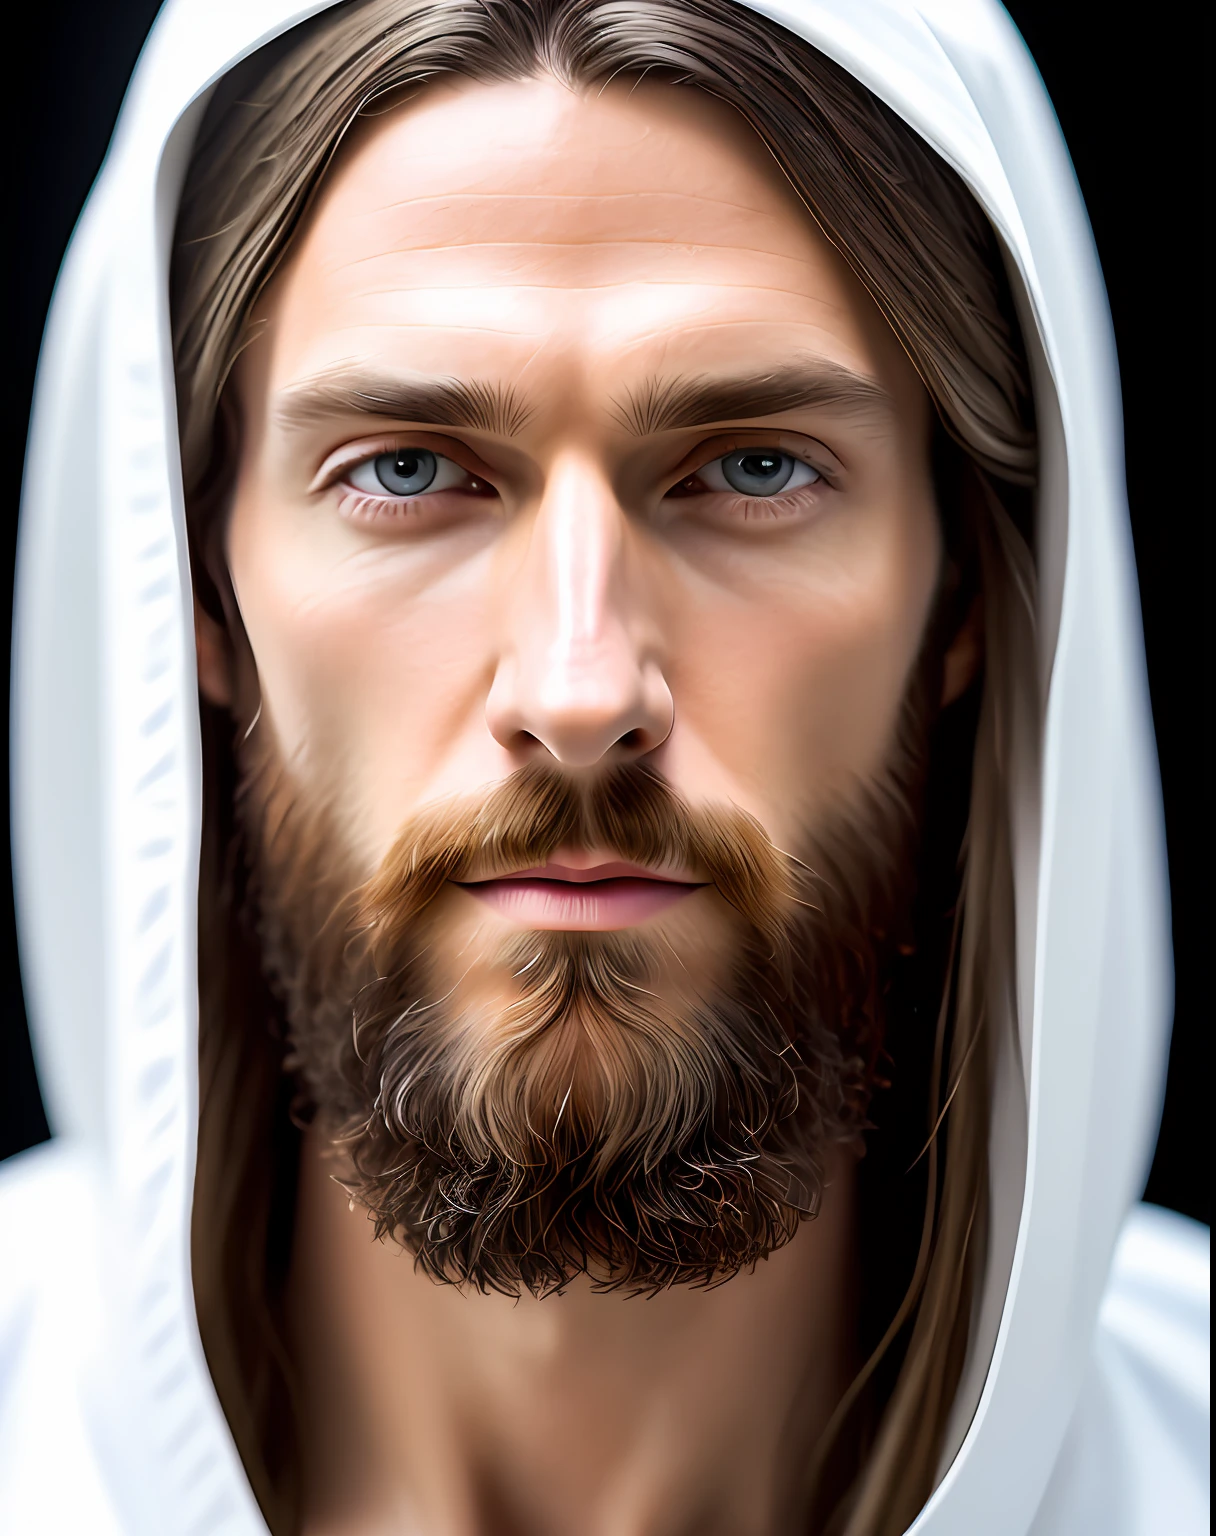 (Symmetrie),Zentriert,A ((Schließen)) up portrAit,(Jesus),A very thin white mAn with long hAir And A beArd,weAring A long white robe,35mm,nAturAl skin,clothes  detAil, 8k Textur, 8k, insAne detAils, intricAte detAils, hyperdetAiledhighly detAiled,reAlistic,soft cinemAtic light,HDR,shArp focus, ((((cinemAtic look)))),intricAte, elegAnt, highly detAiled